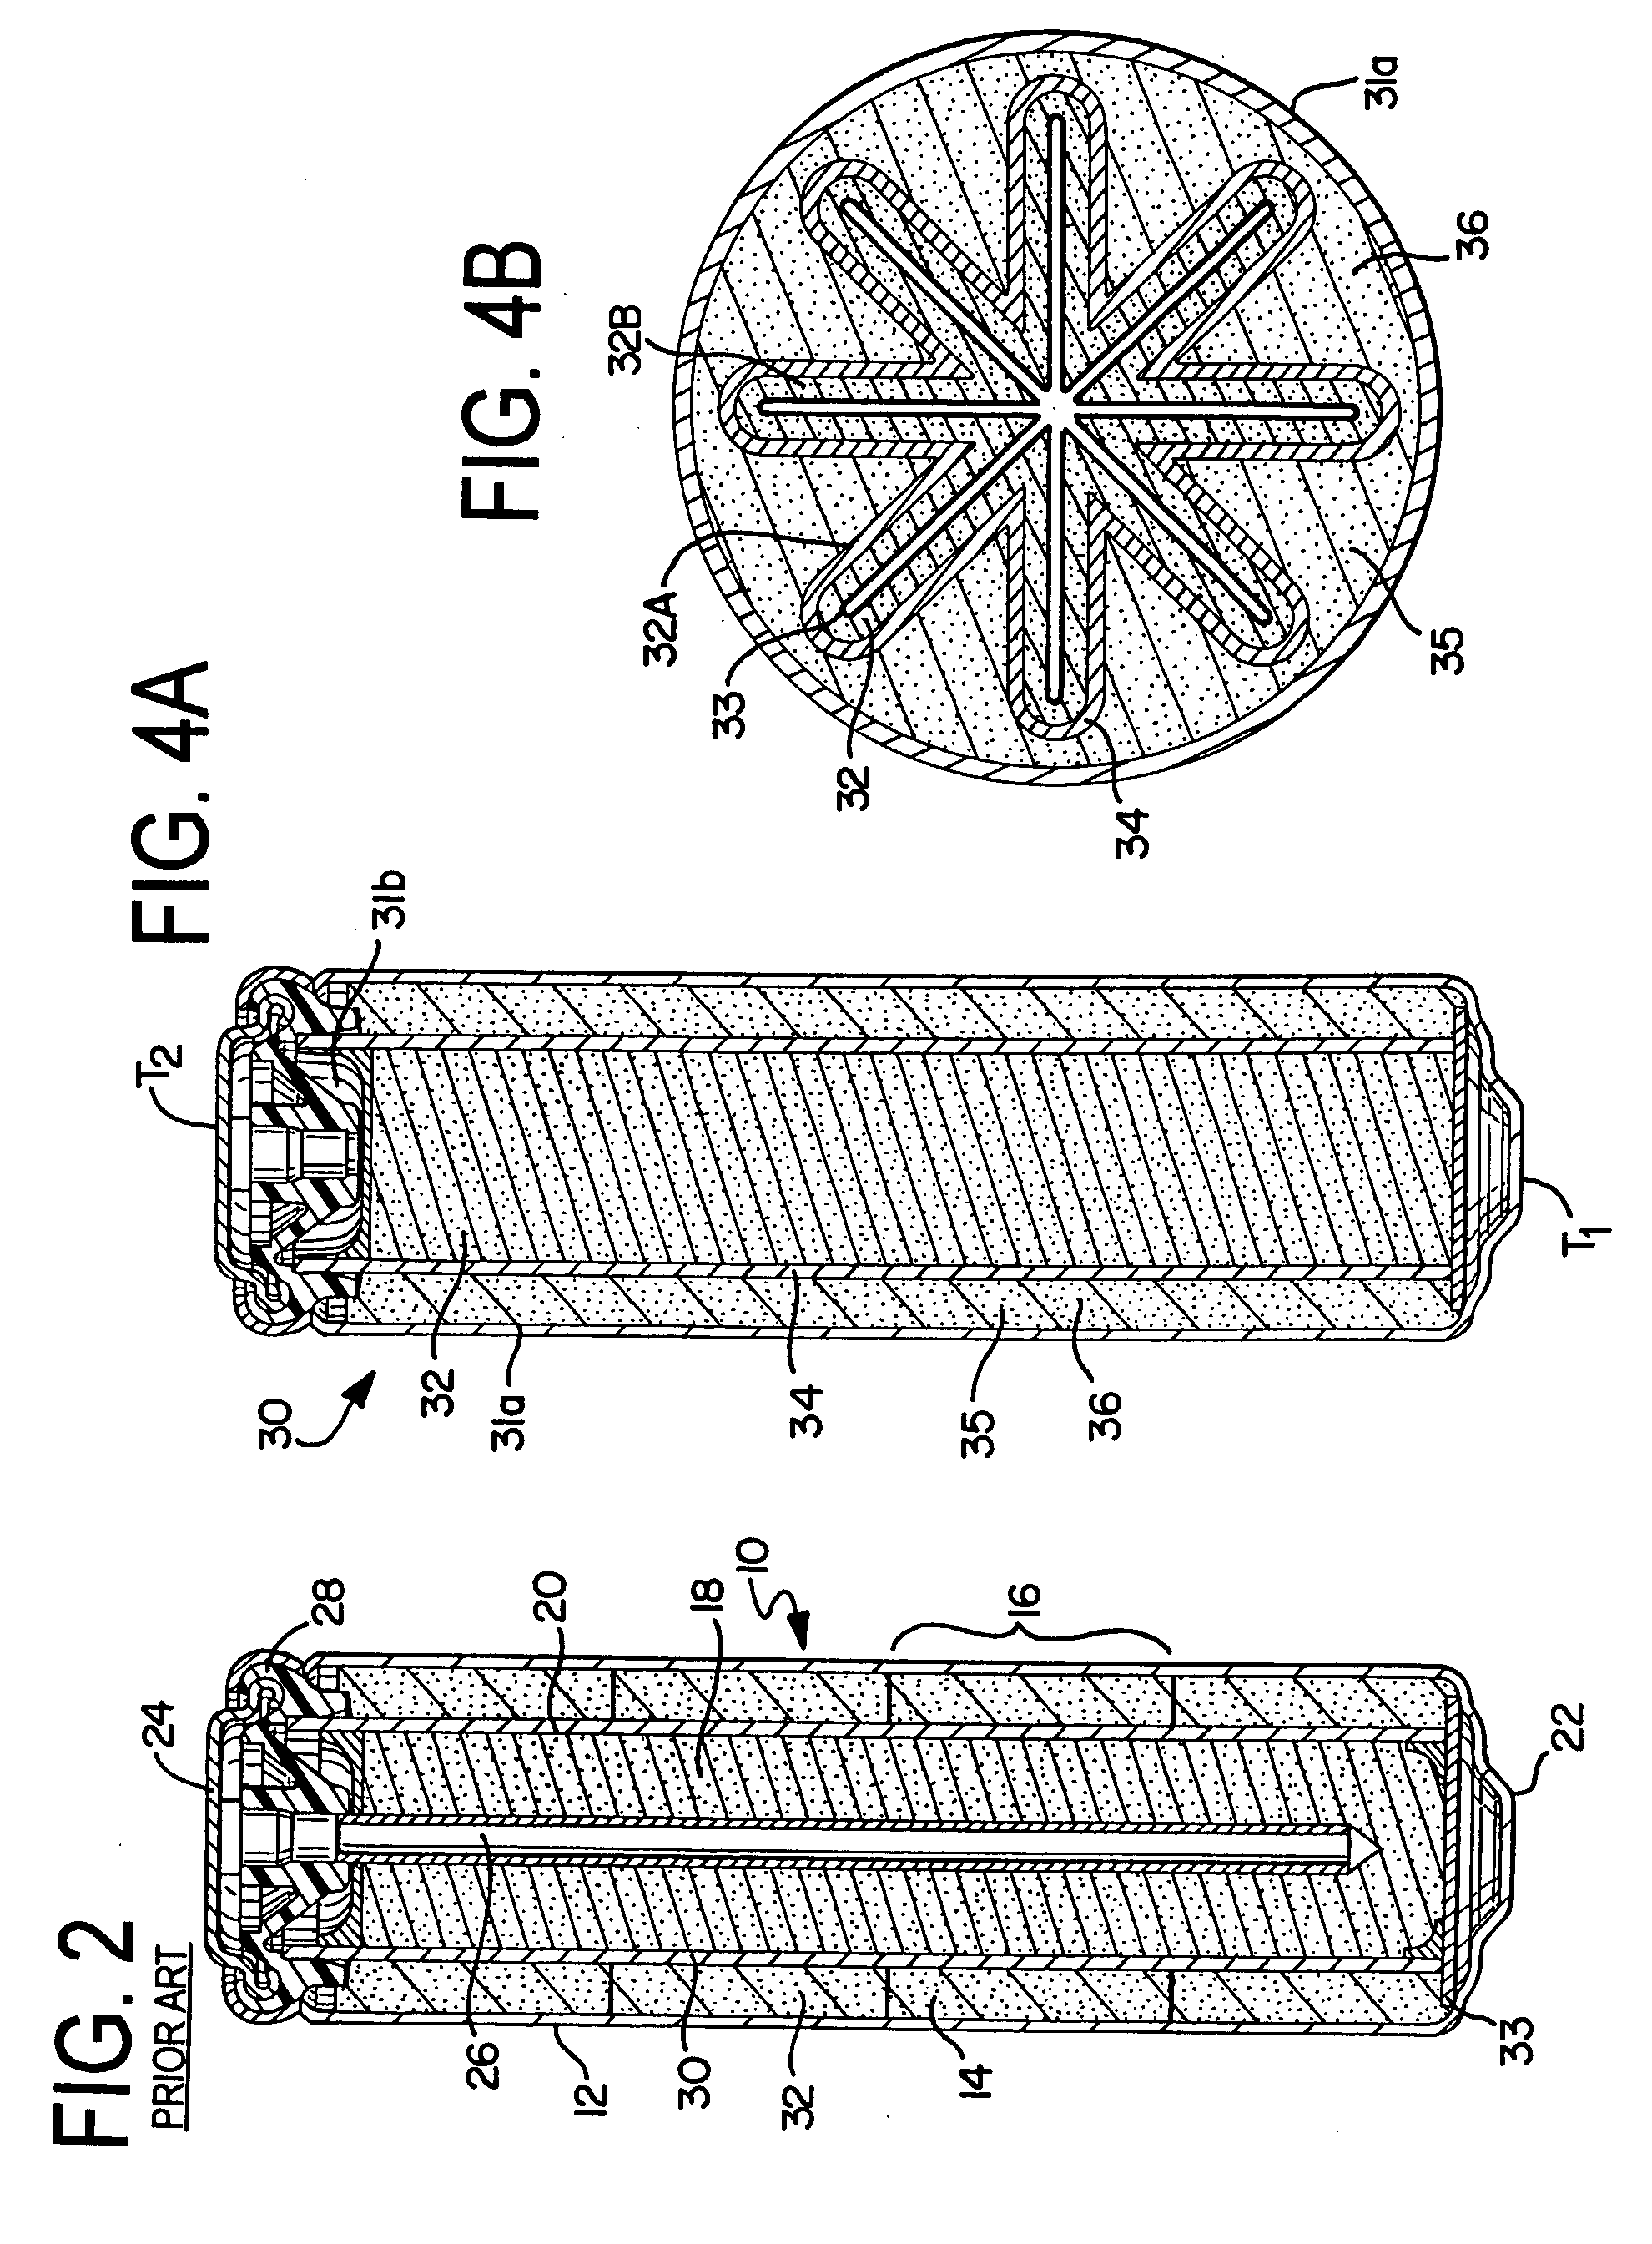 Cylindrical battery cell having improved power characteristics and methods of manufacturing same